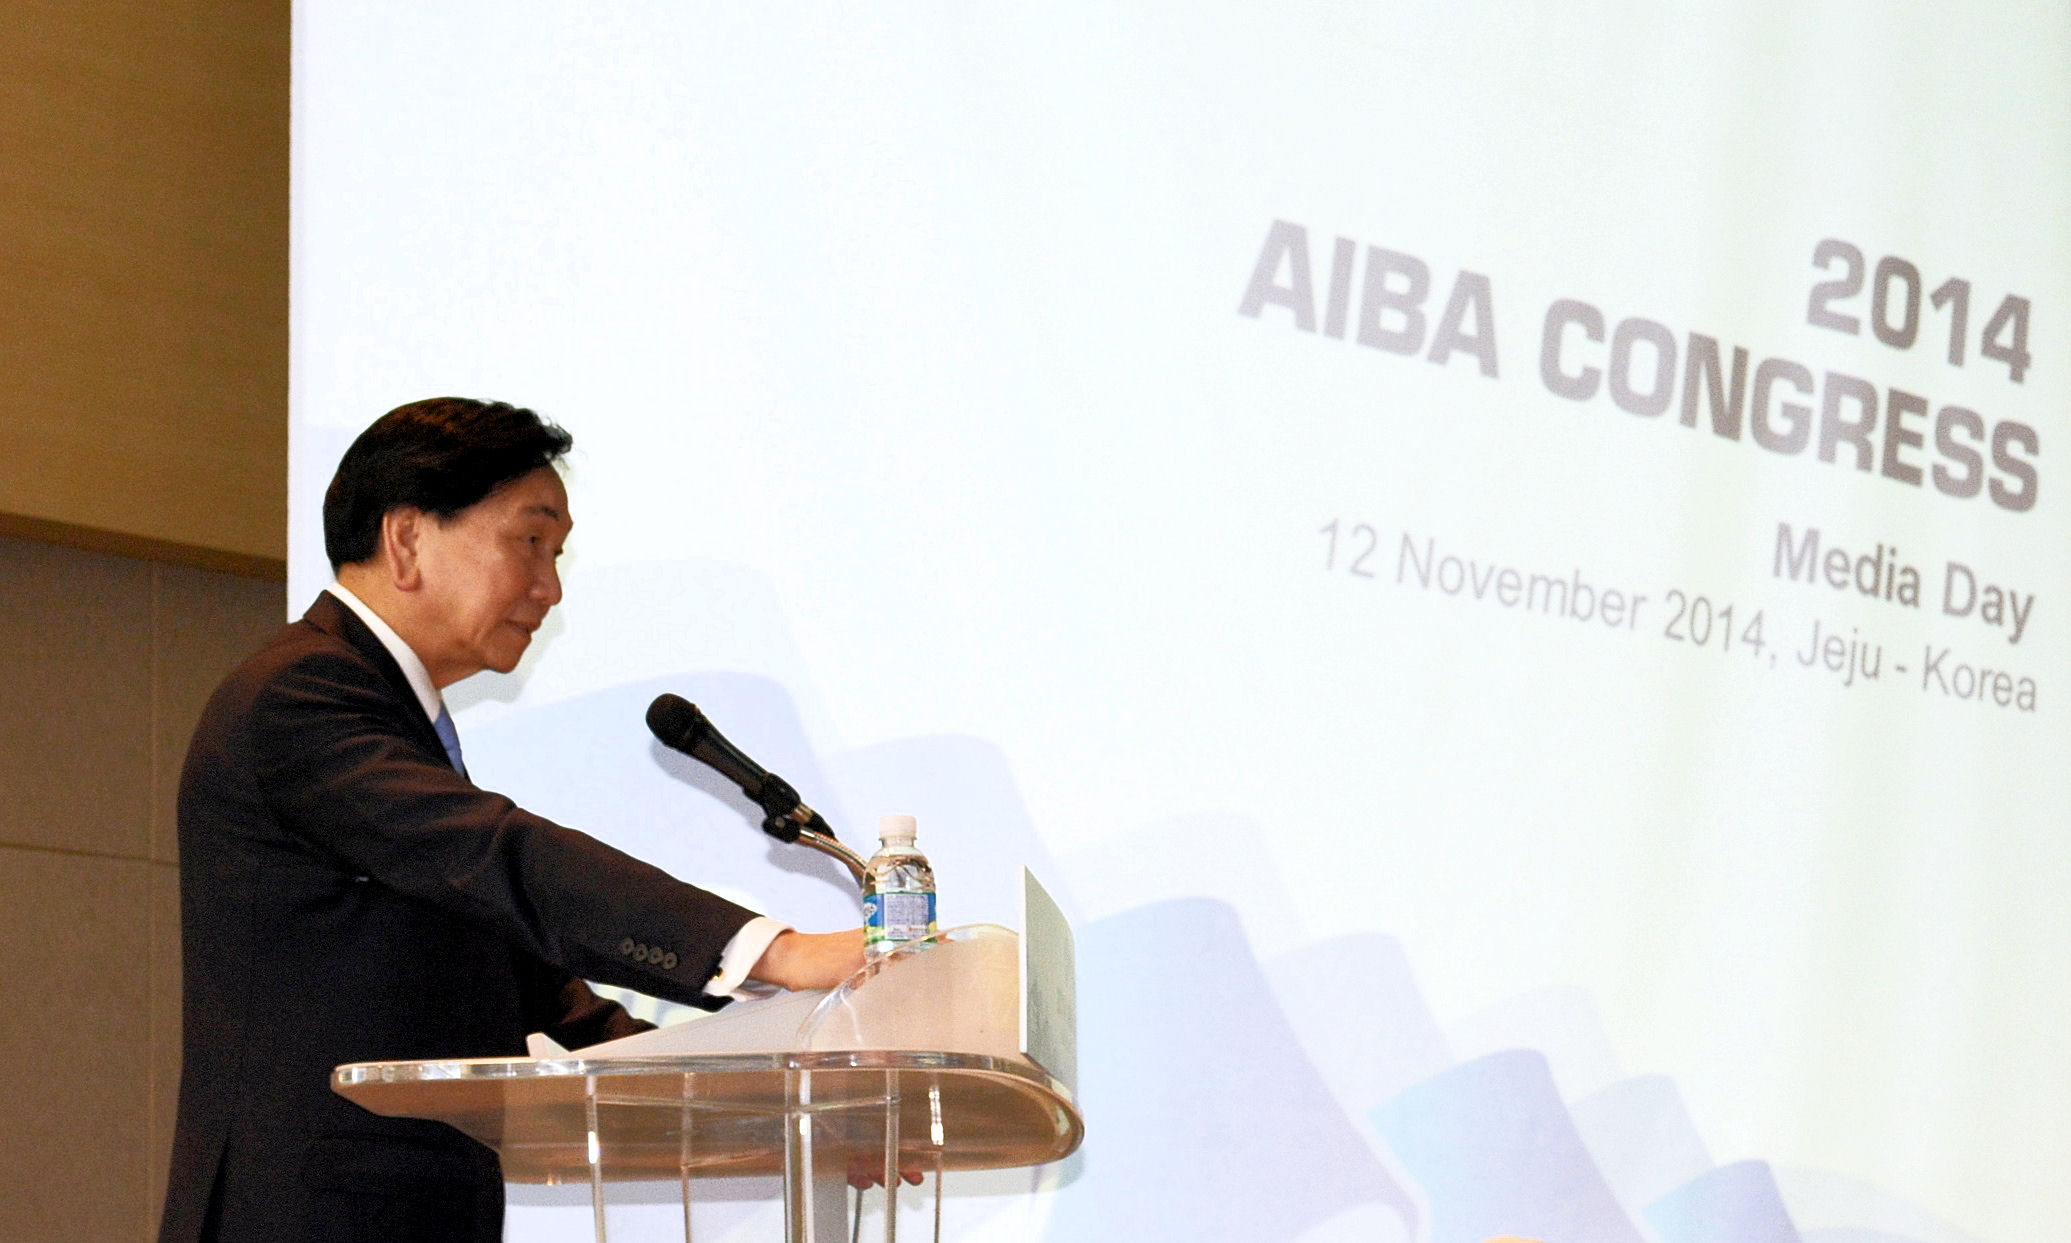 C K Wu is set to be re-elected as AIBA President at the Congress in Jeju ©Valerie von Eberhardt